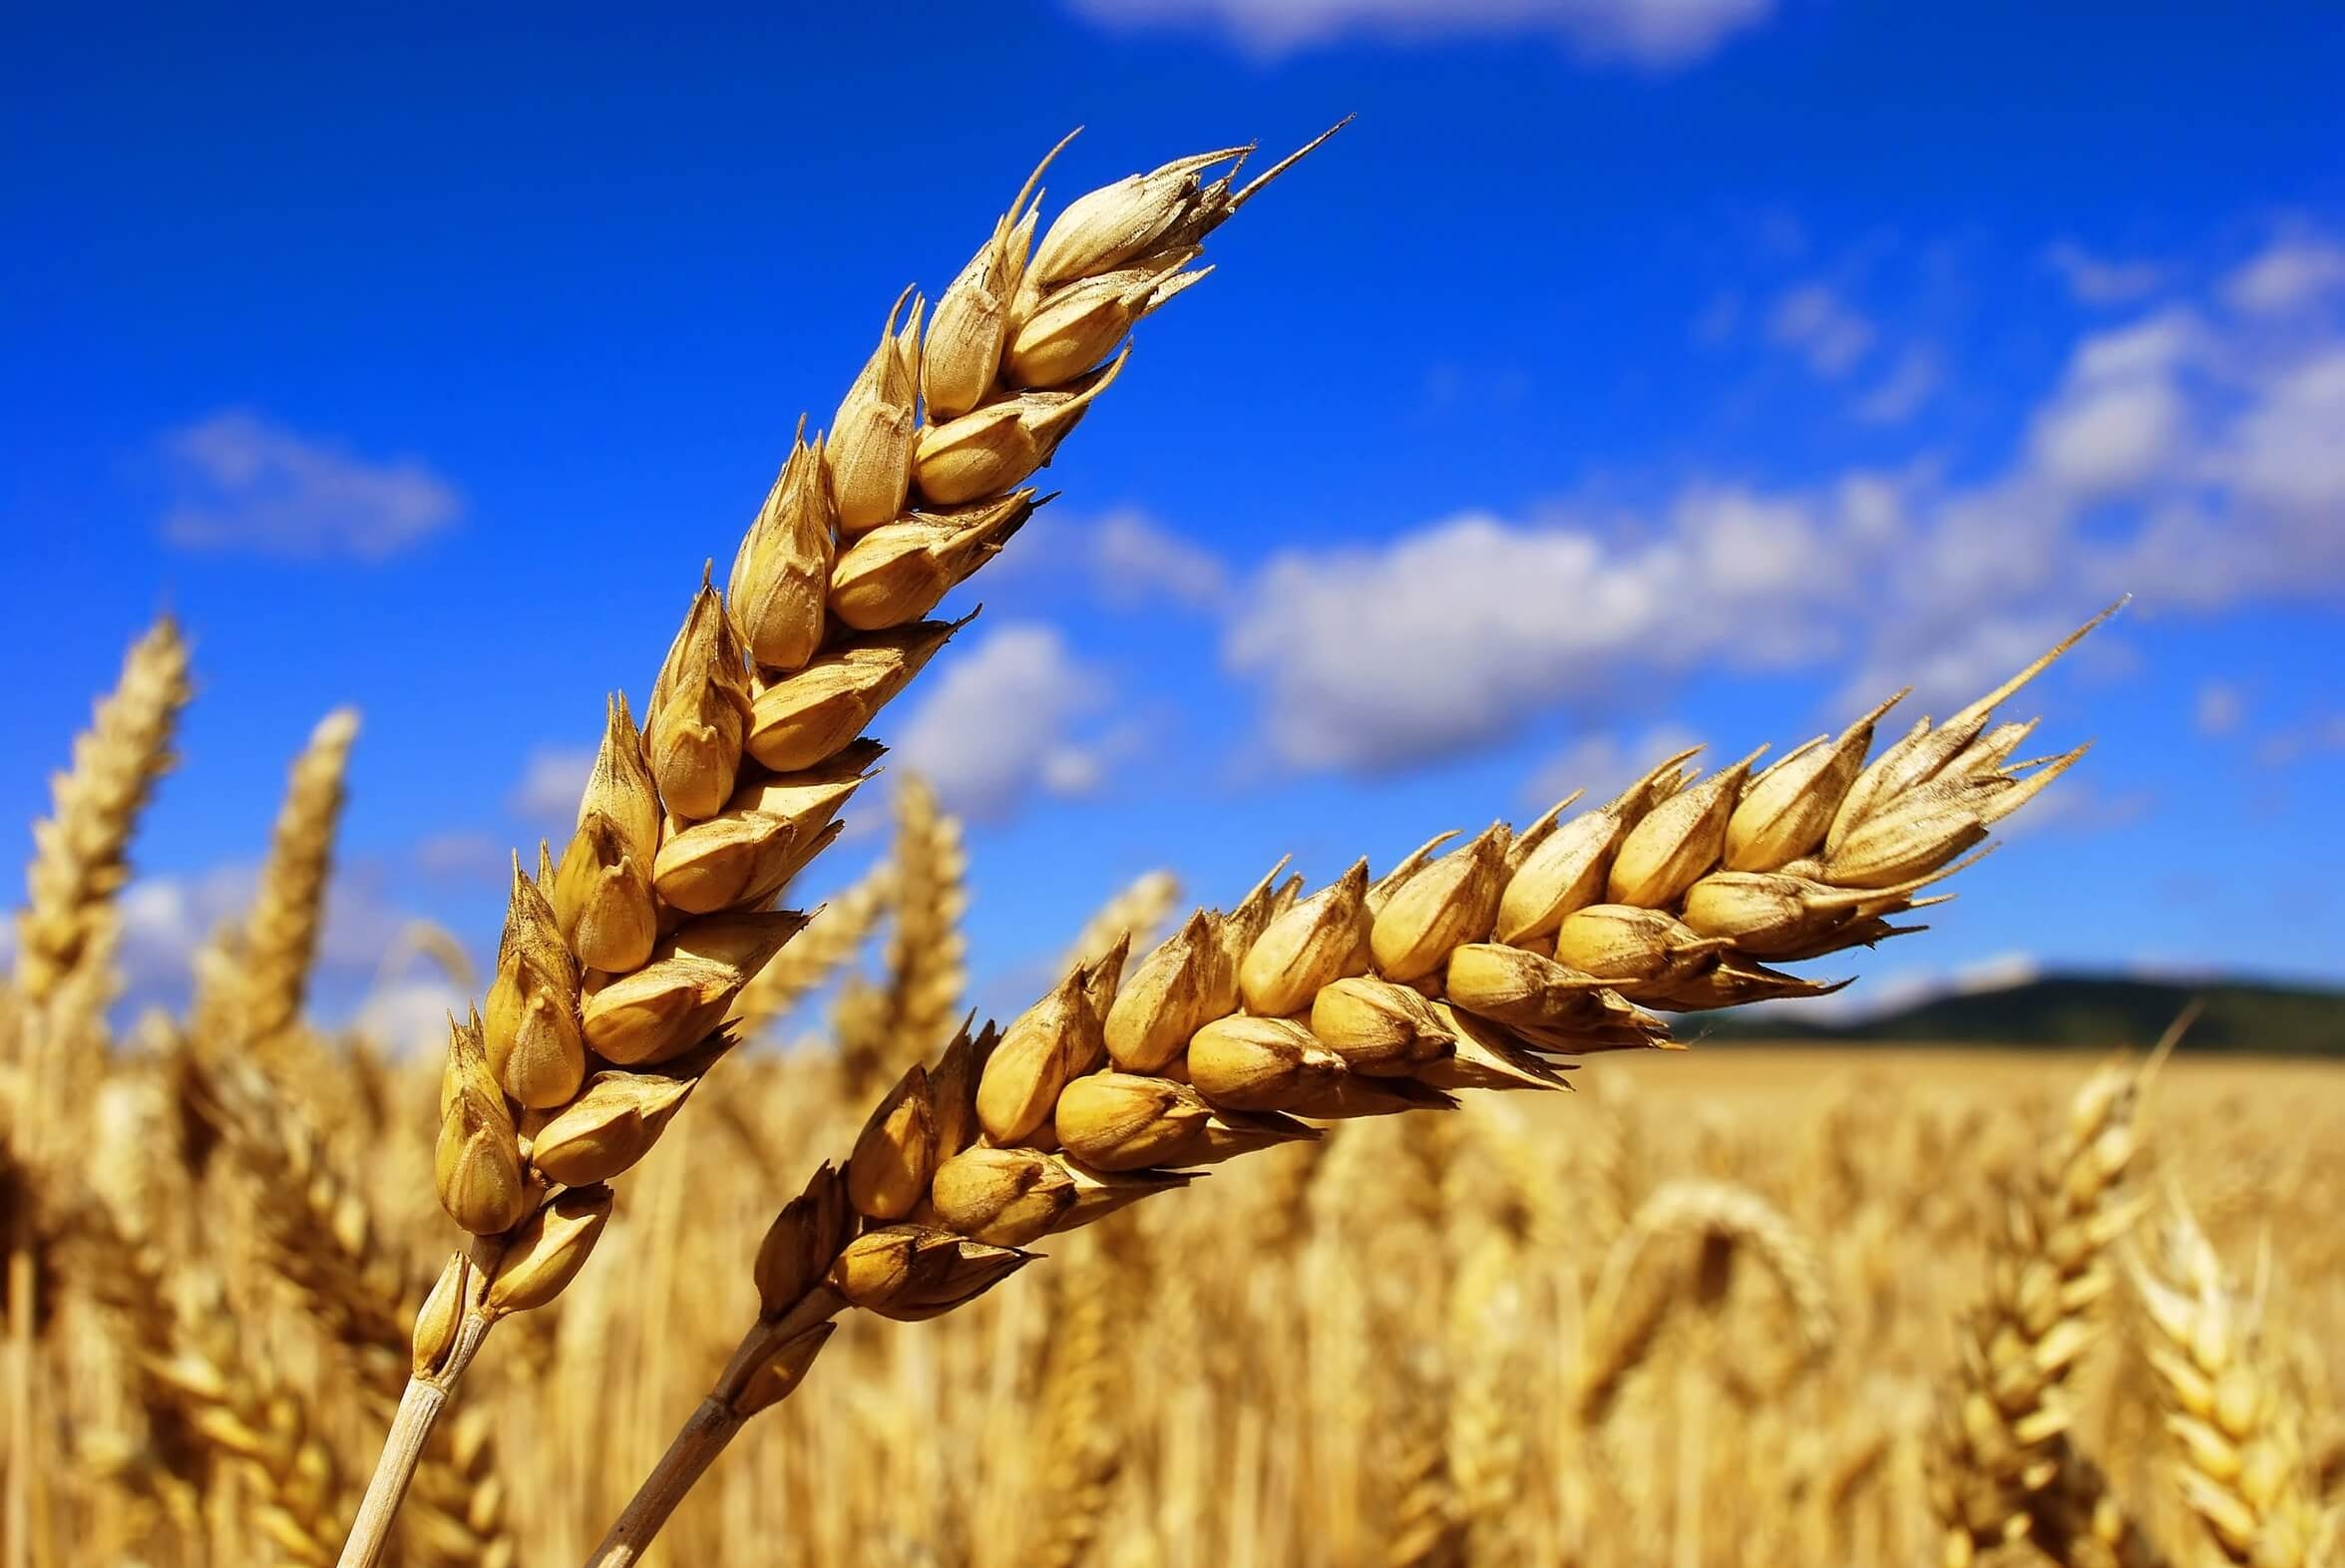 Wheat futures on world exchanges decreased by 2-4.4% for the week